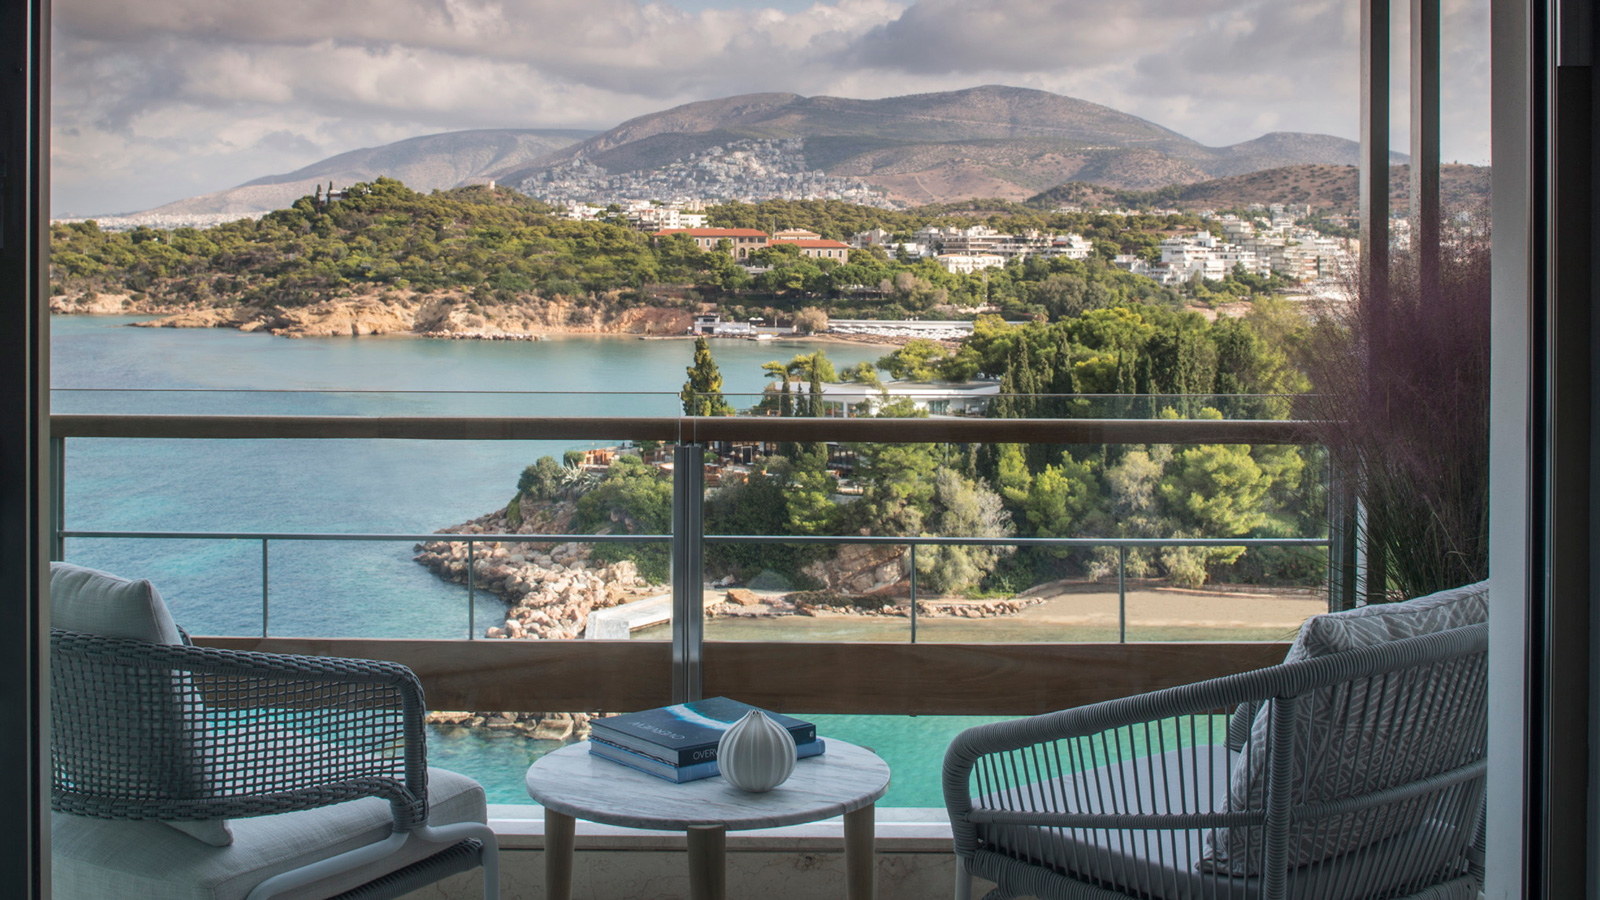 The Four Seasons Astir Palace Hotel Athens is now accepting reservations for arrivals beginning 29 March 2019. The luxury resort is located on a pine-clad peninsula jutting into the Aegean Sea, just minutes from the historic city centre of Athens. Click to enlarge.